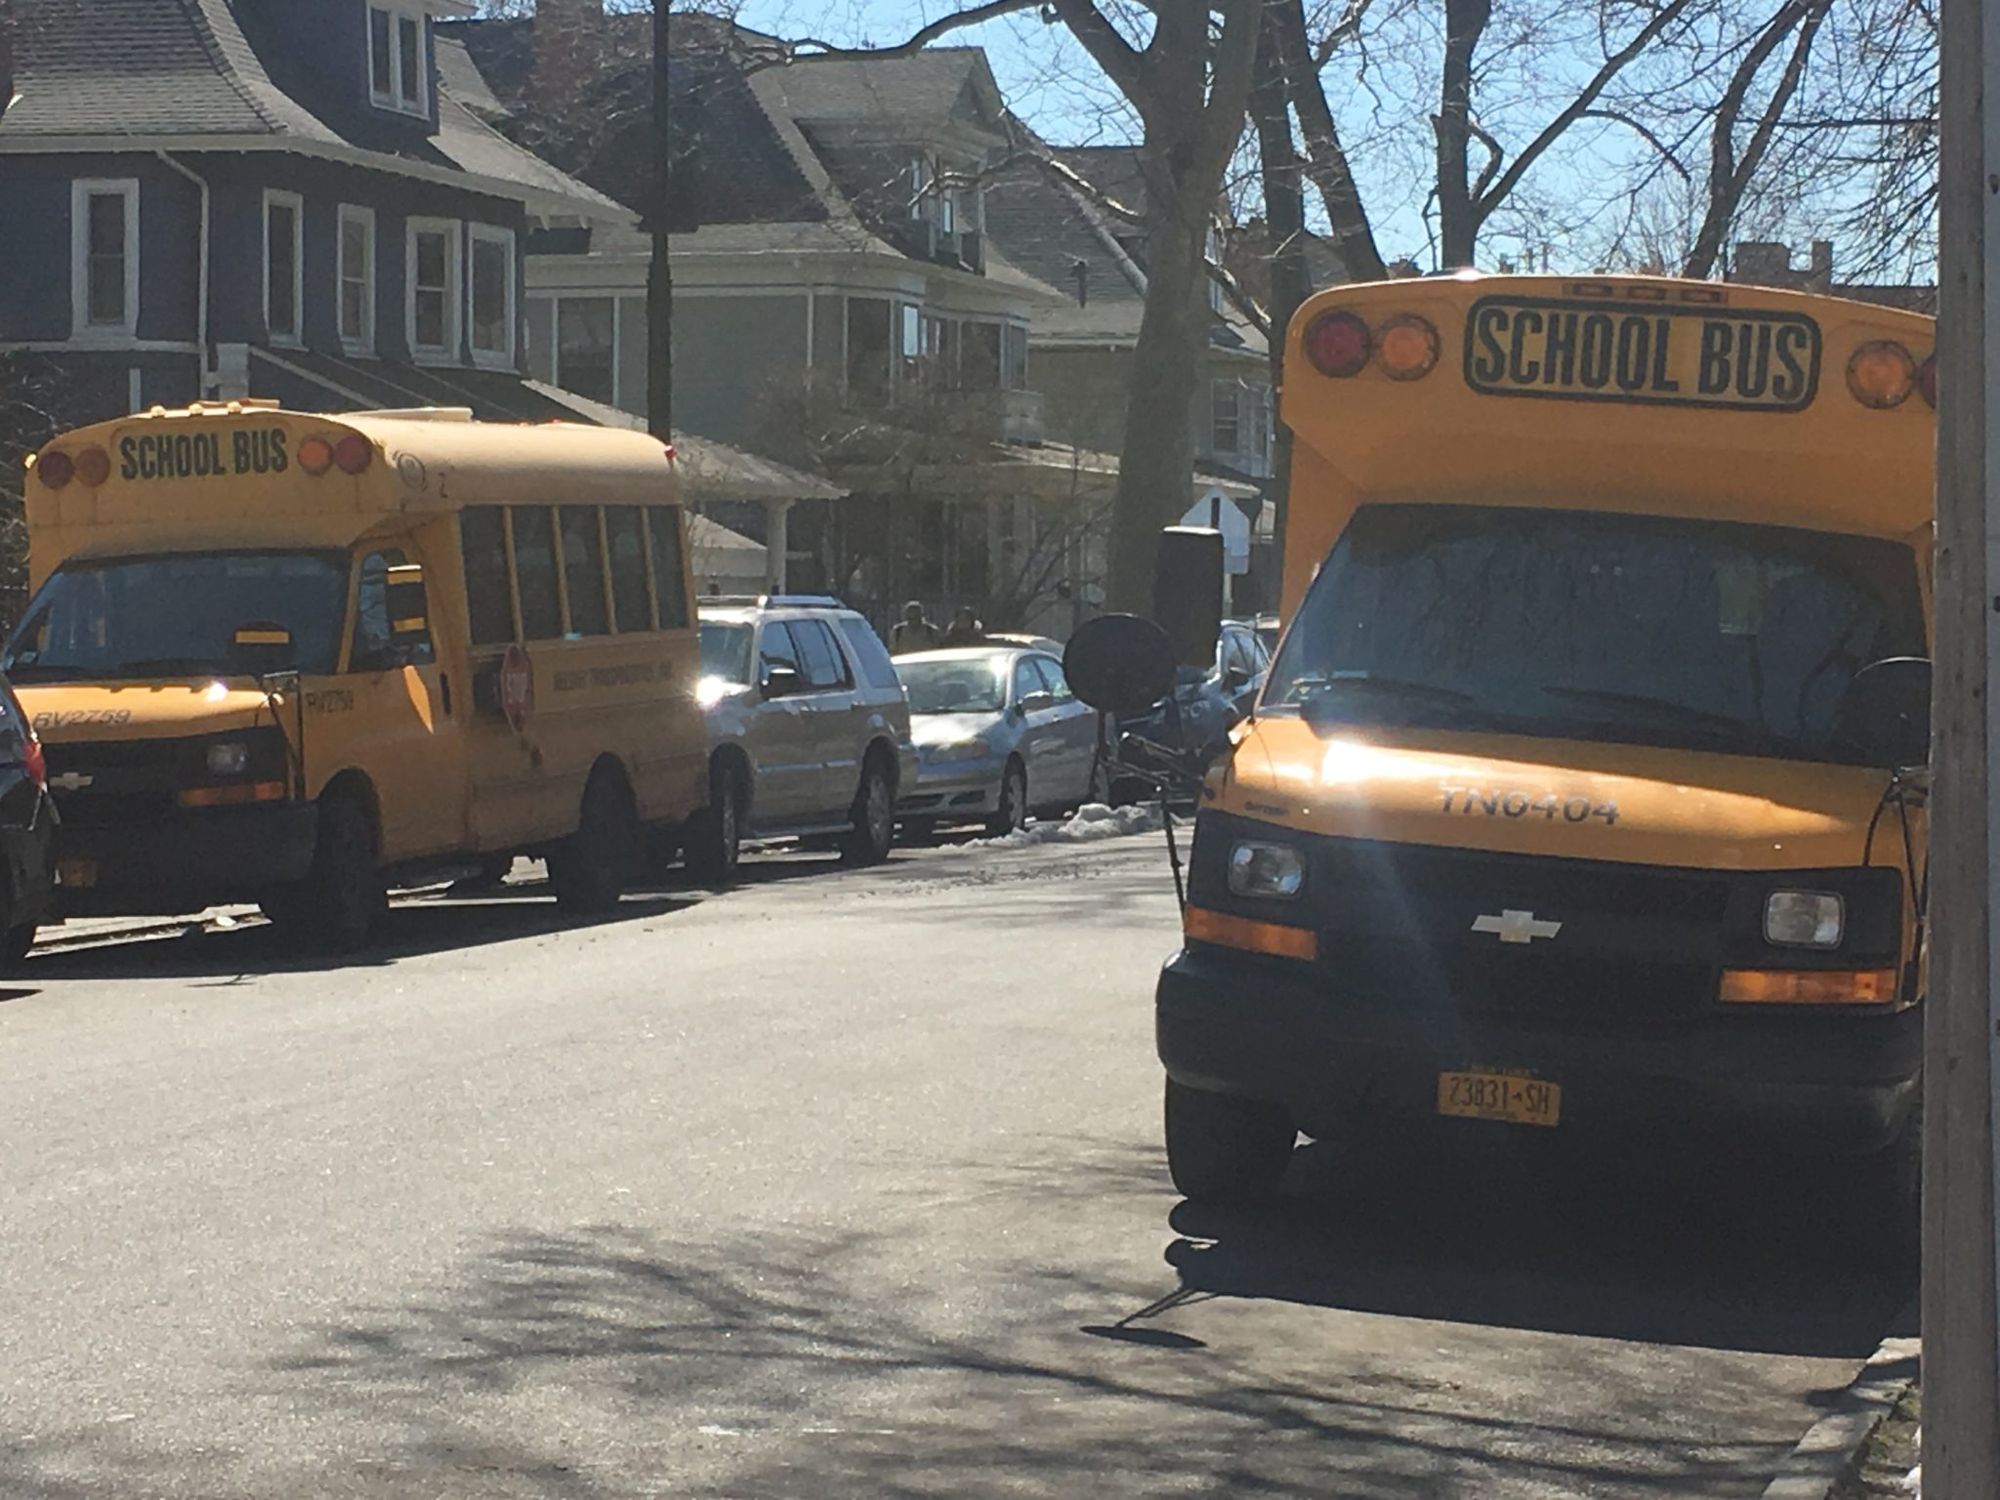 Parking Wars: Can School Buses Park On Your Block Overnight?